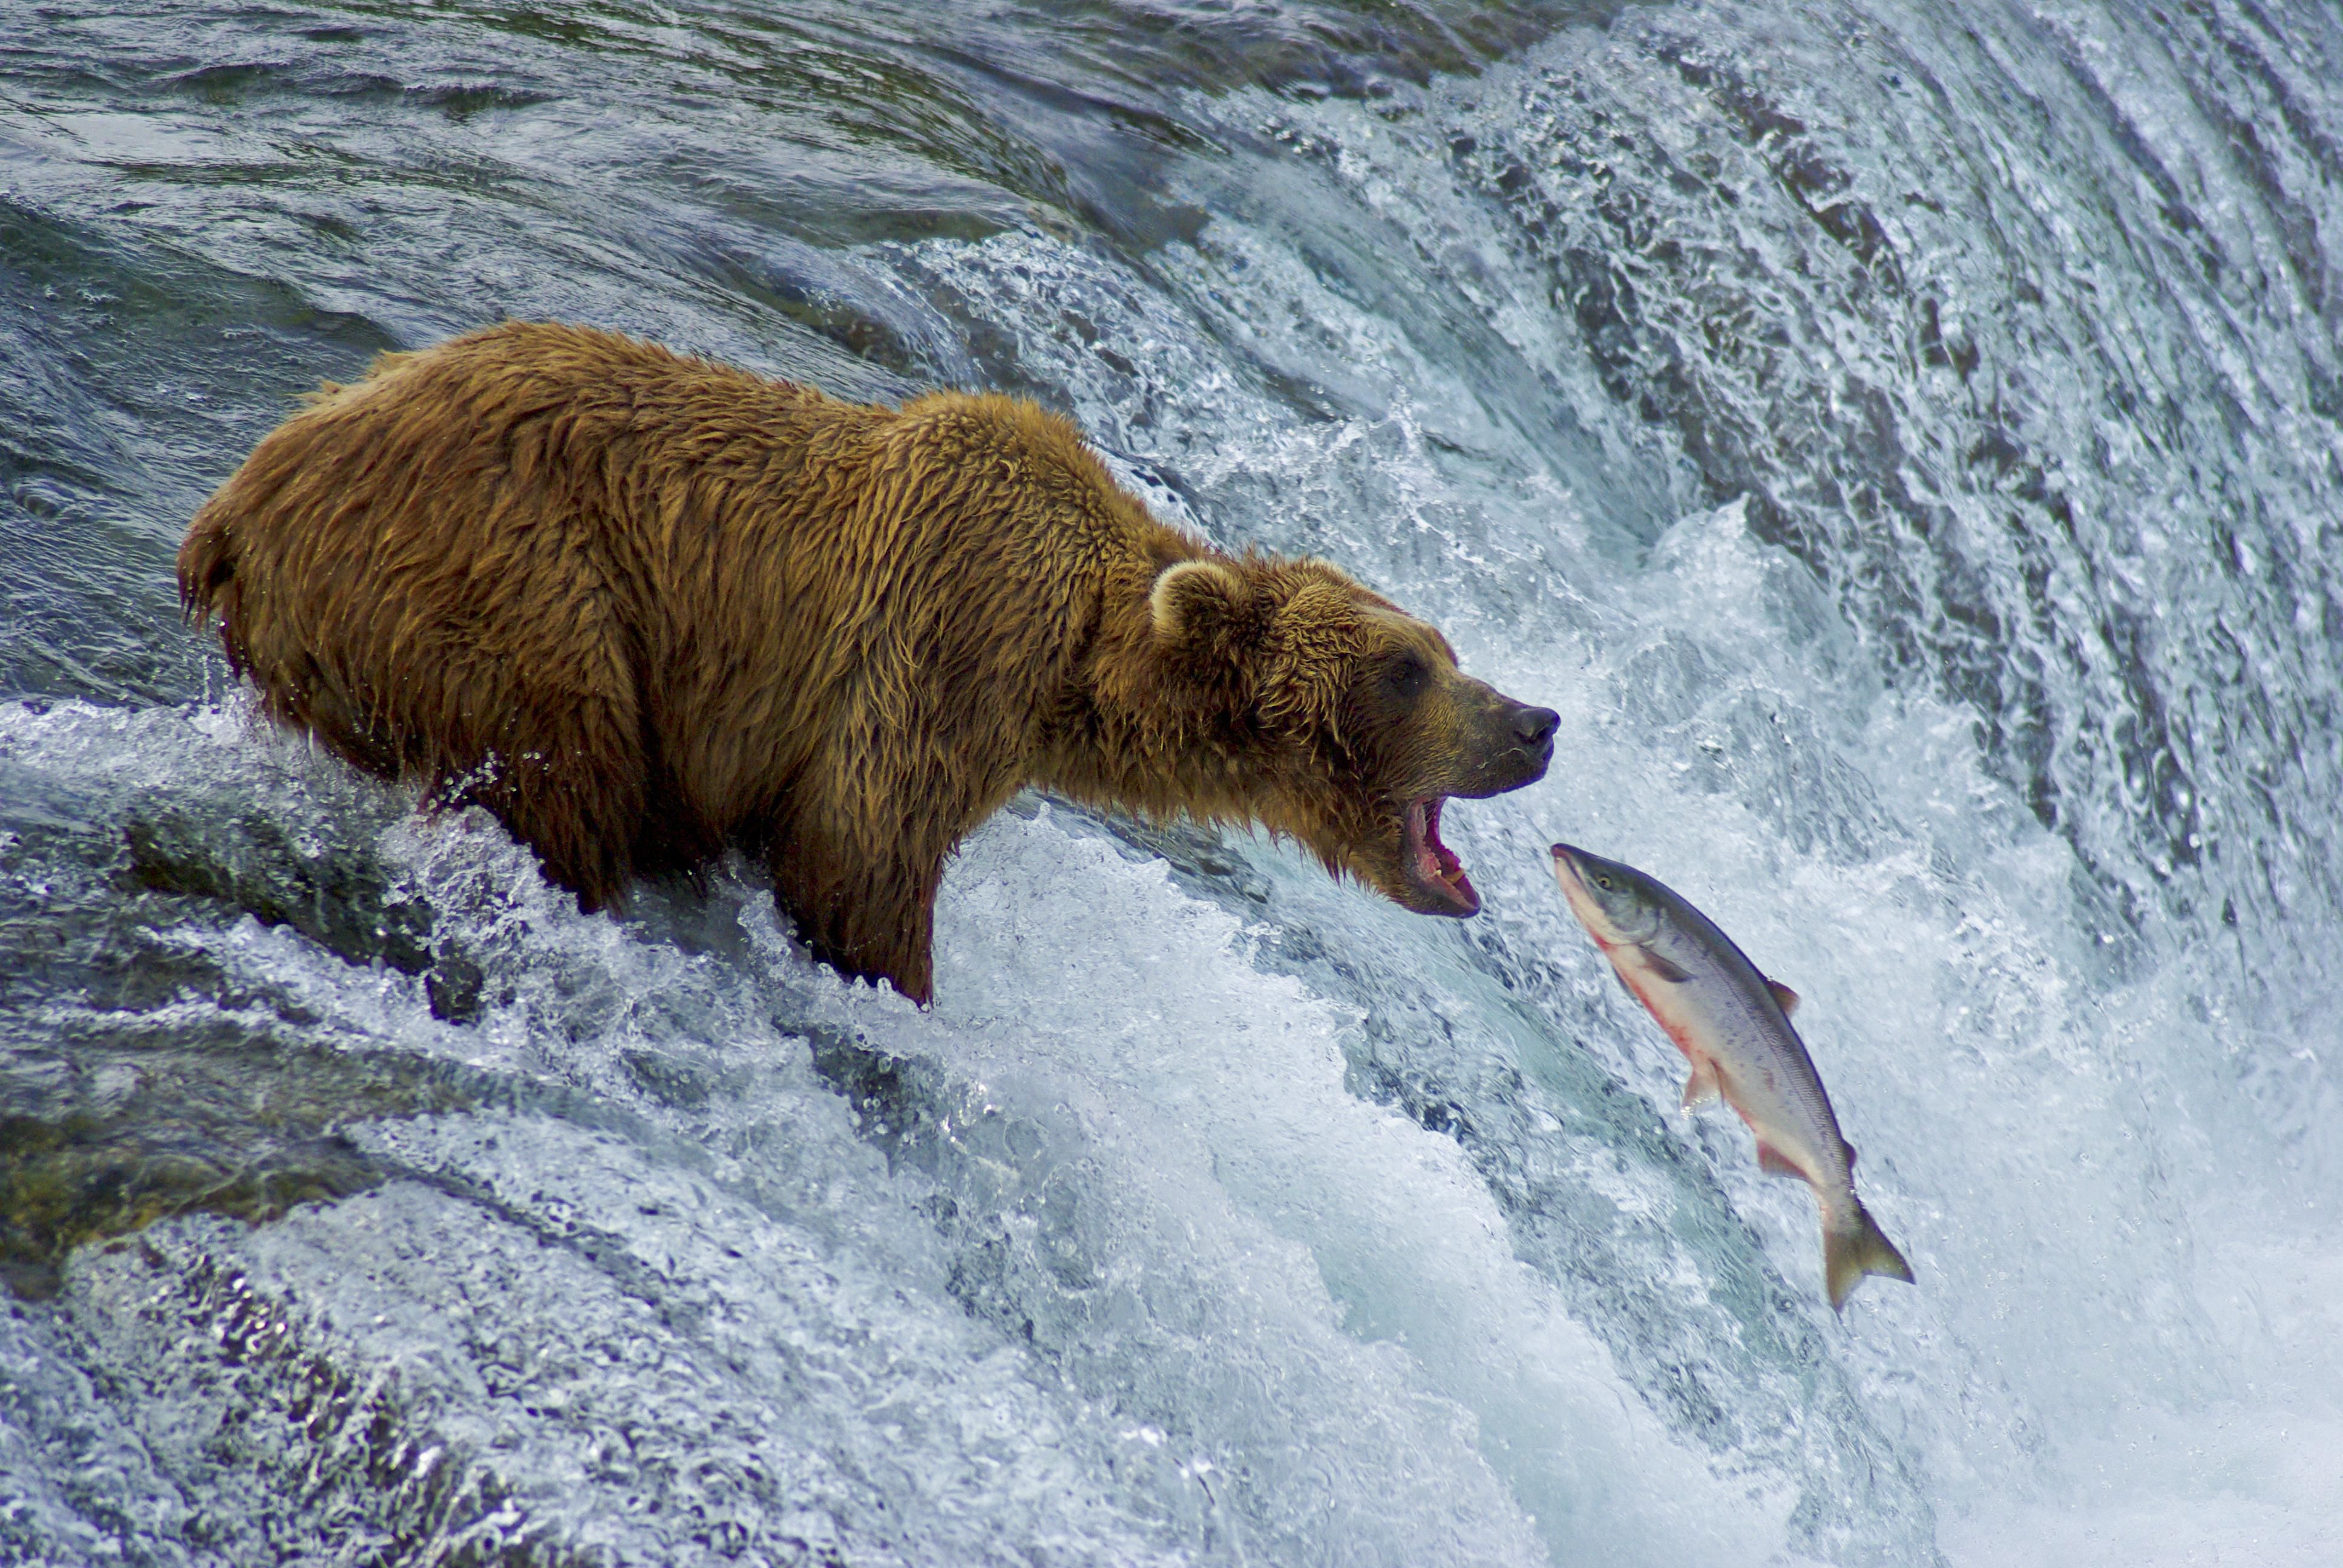 Bear Catching Fish | Grizzly & Salmon | Pinterest | Fish, Bears and ...